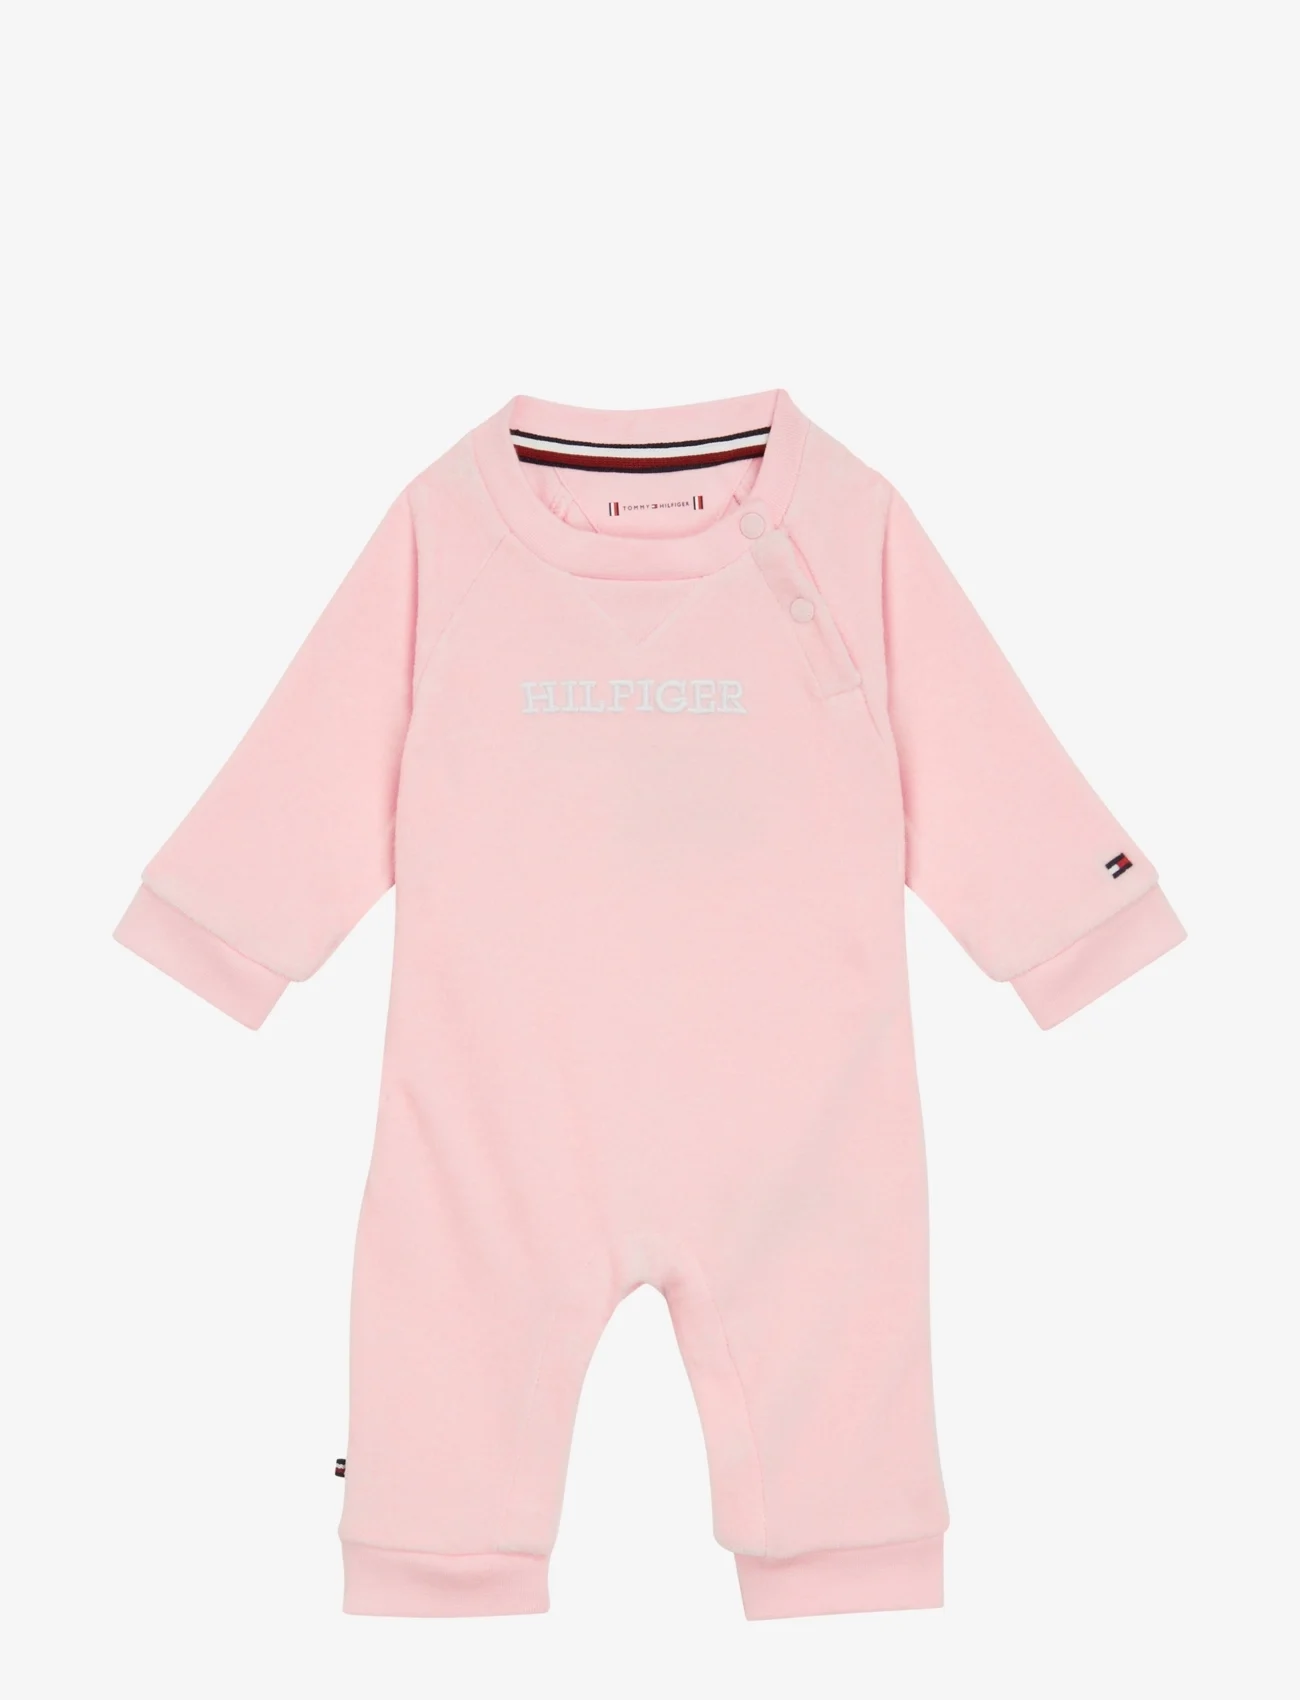 Tommy Hilfiger - BABY CURVED MONOTYPE COVERALL - pitkähihaiset - pink crystal - 0